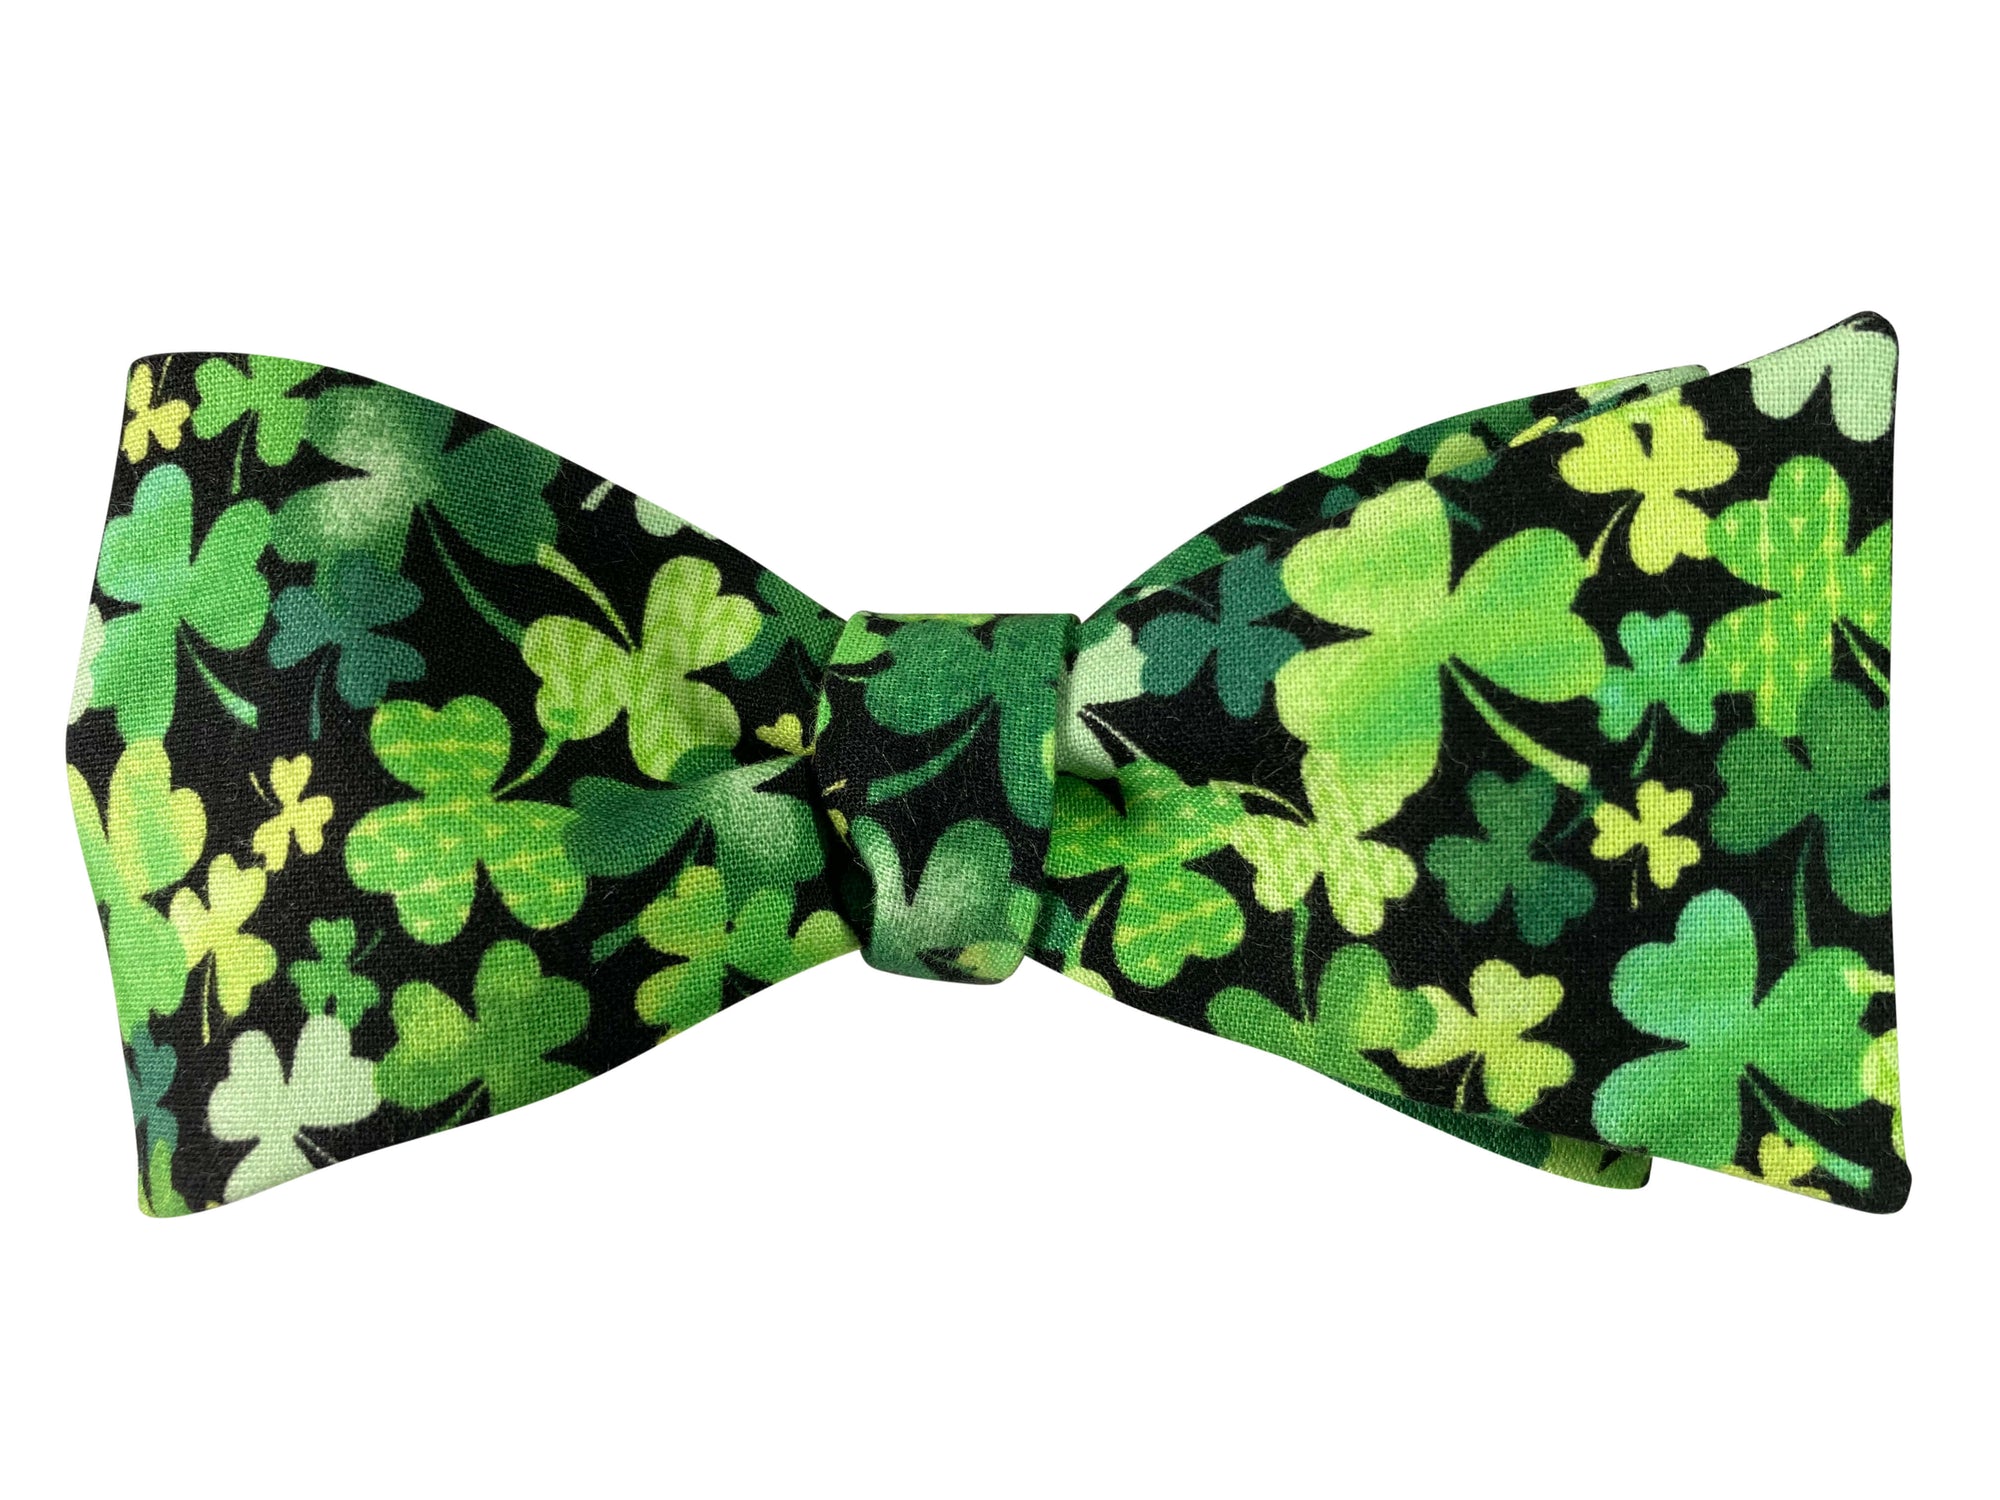 Green and black shamrock self tie bow tie